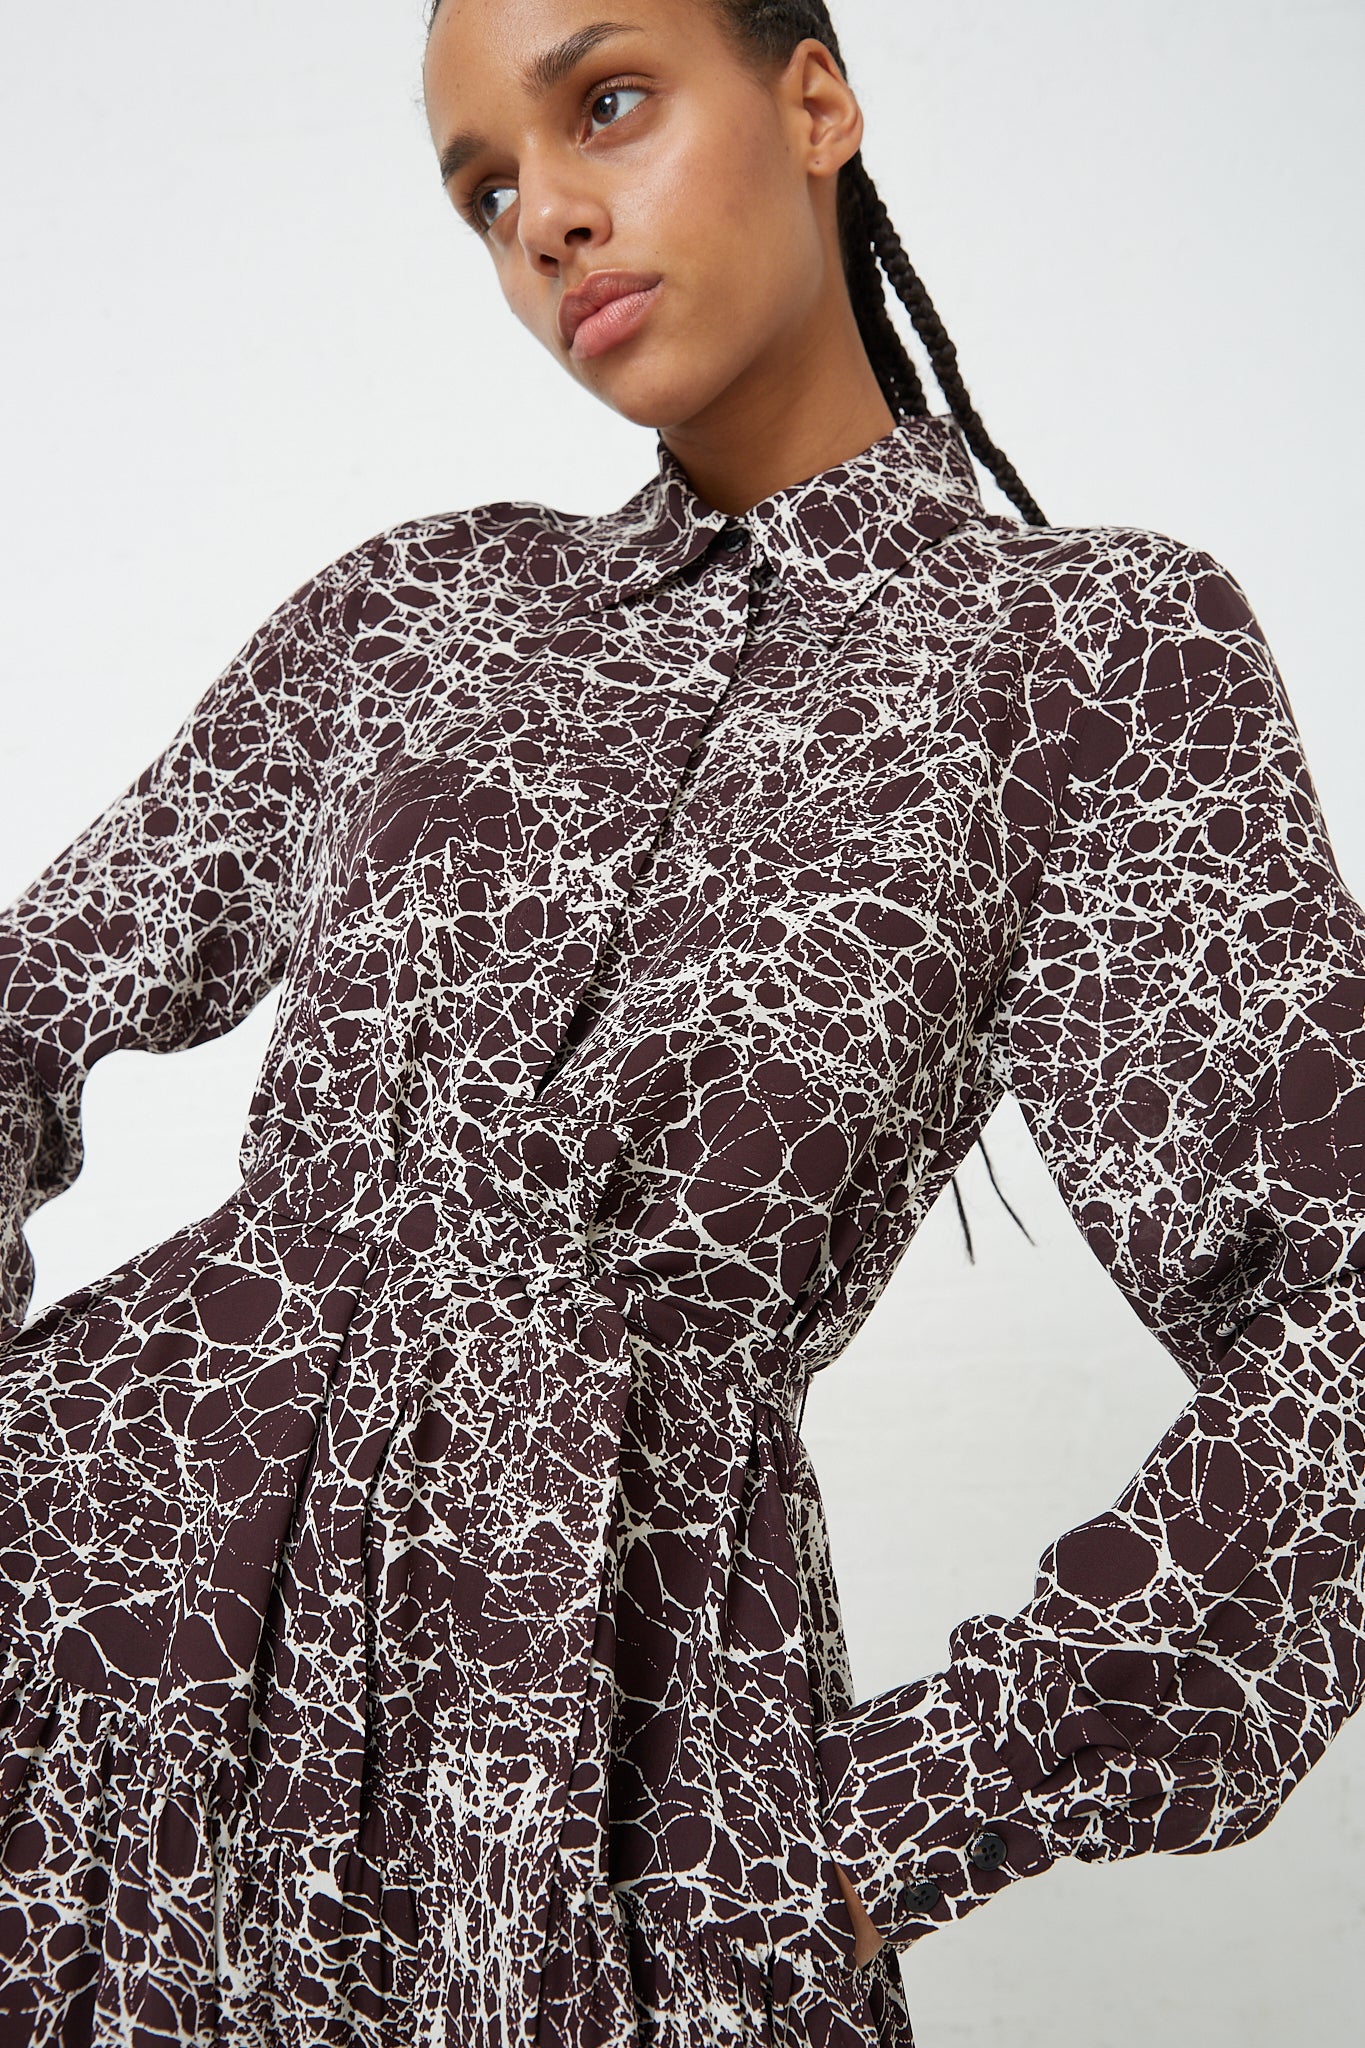 The model is wearing a long-sleeved Silk Marbled Georgette Jana Dress in Brown by Rachel Comey. Up close.